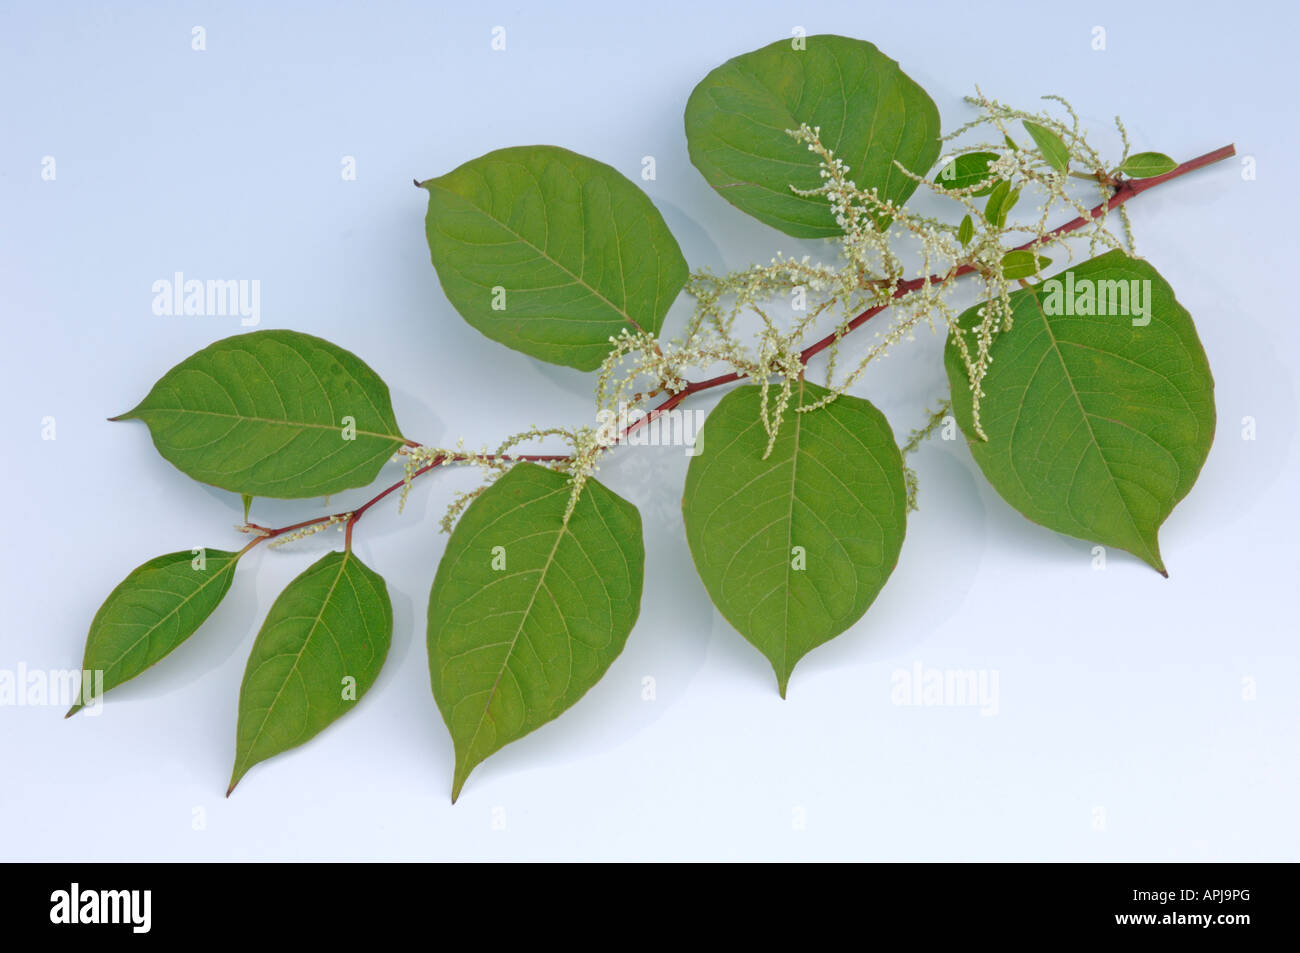 Japanese Knotweed (Reynoutria japonica Fallopia japonica) twigs with leaves and blossoms studio picture Stock Photo